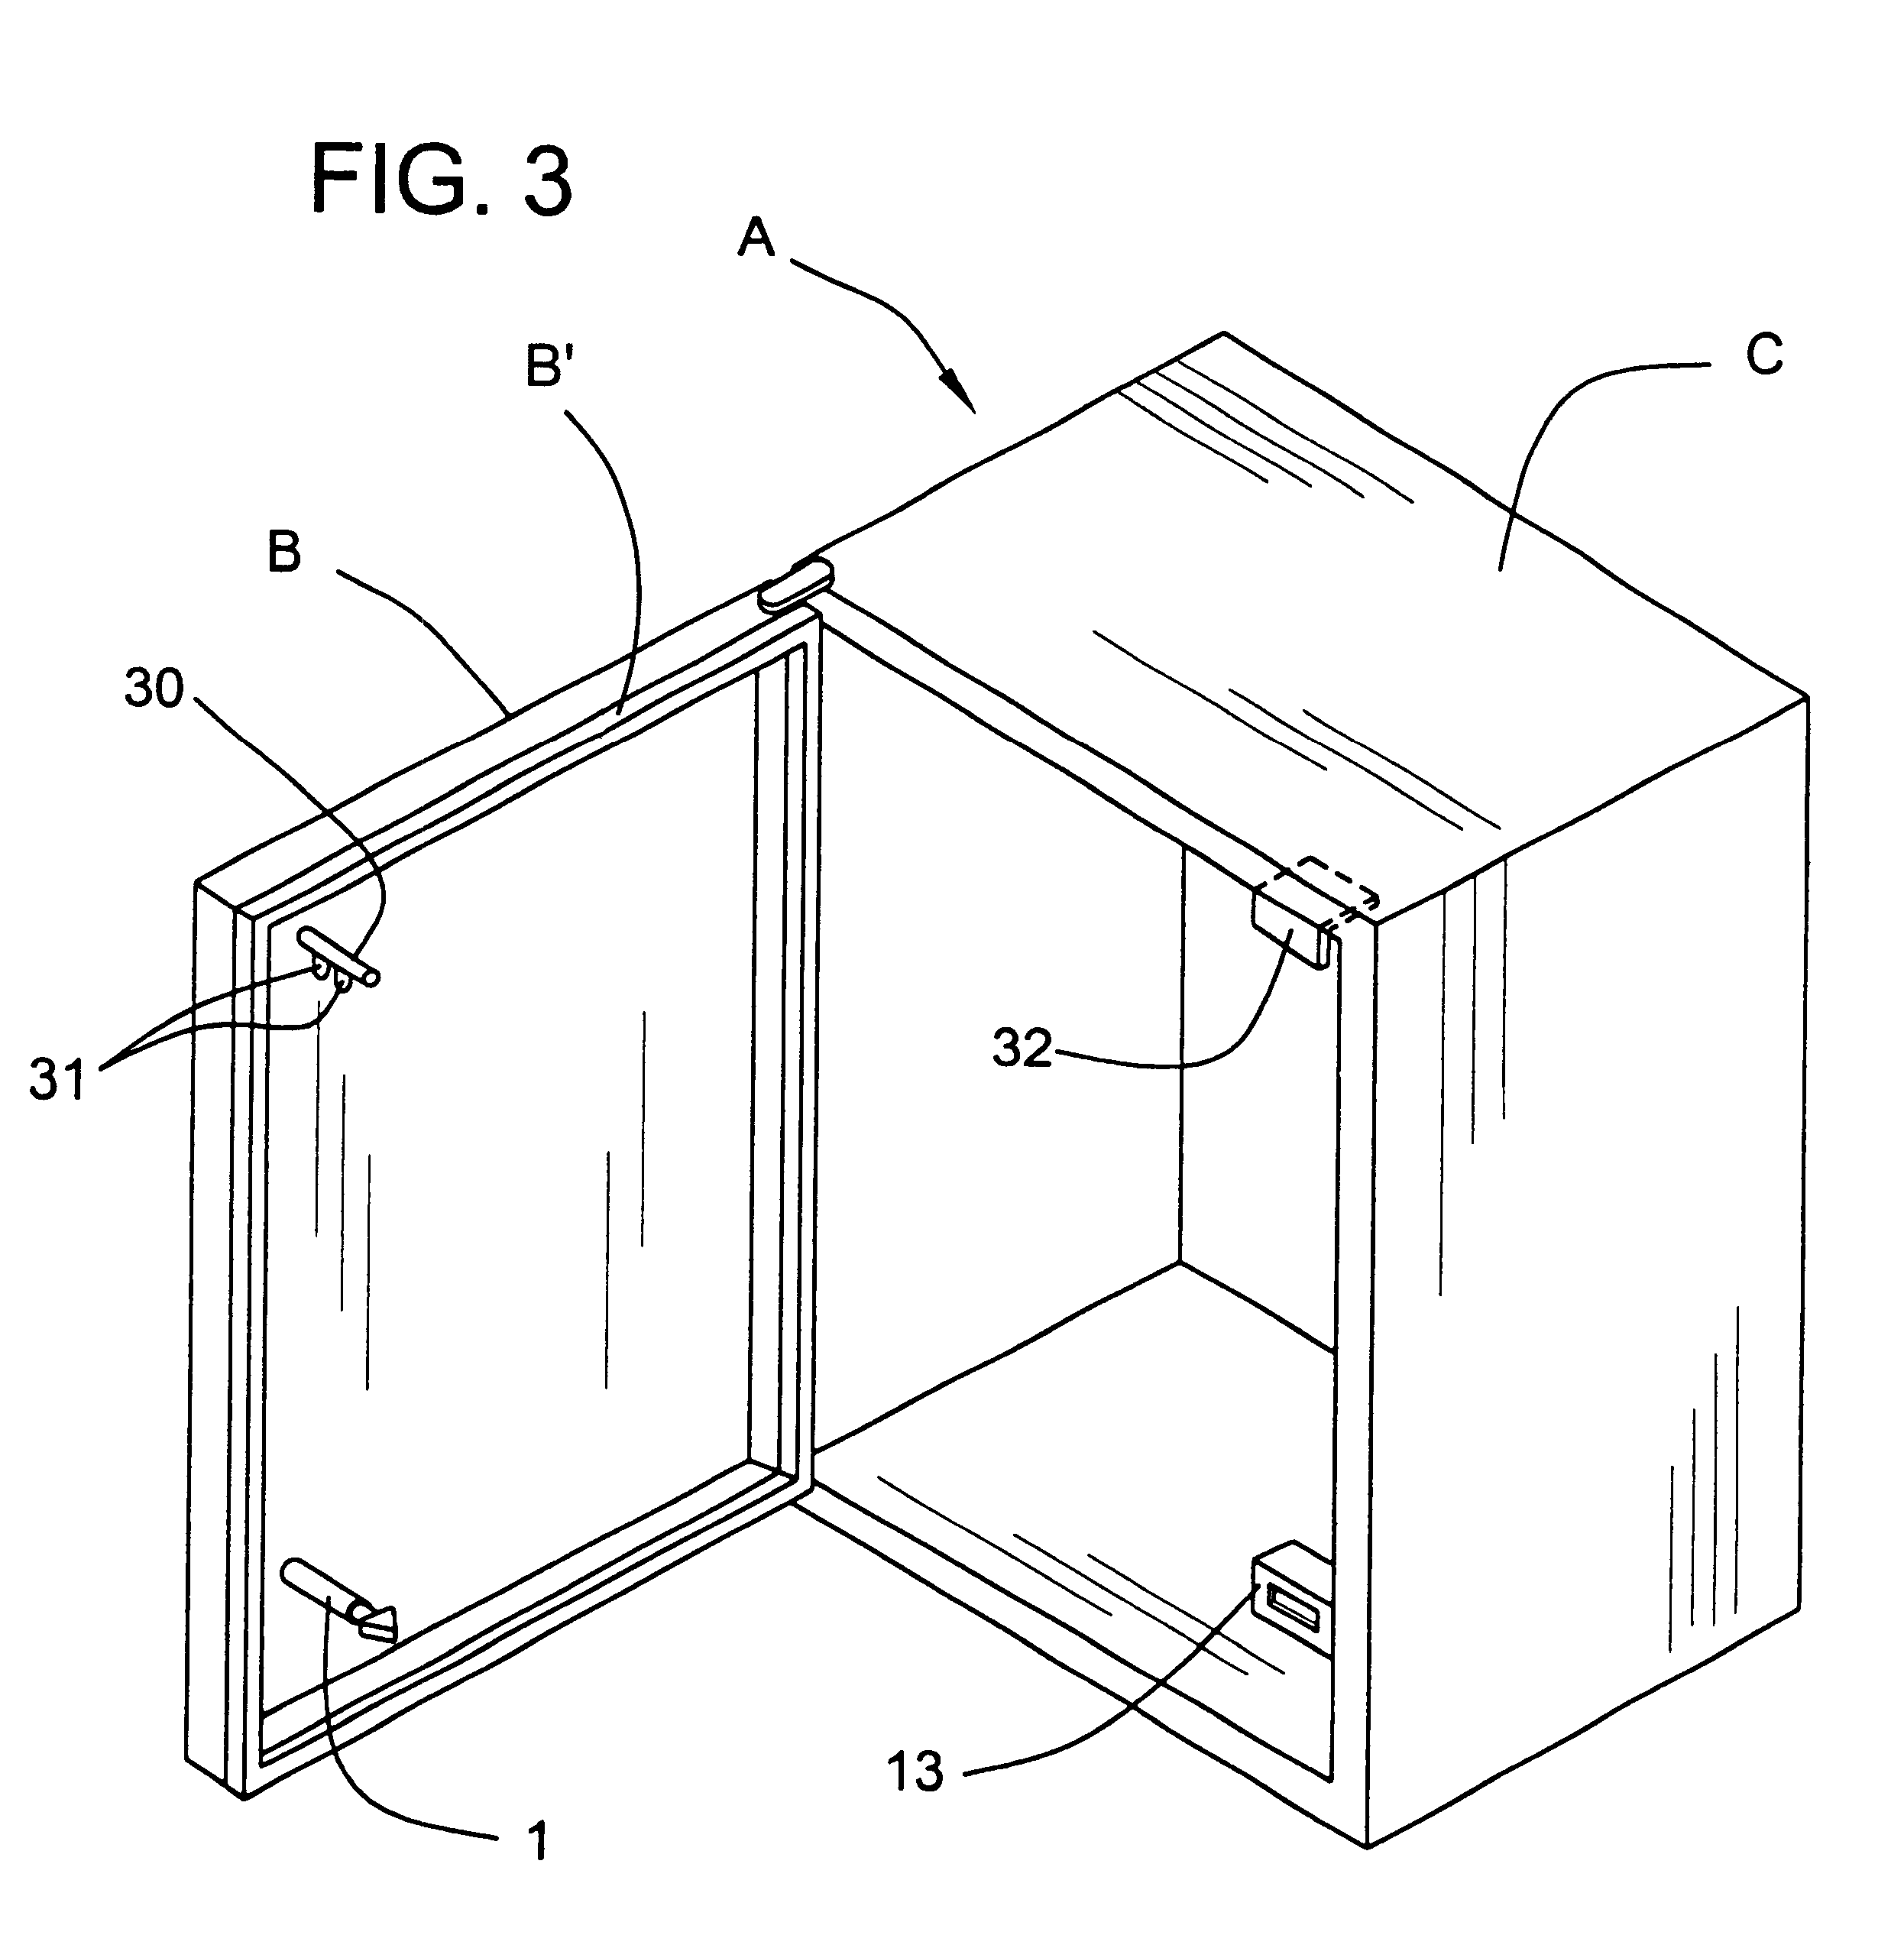 Bayonet locking system and method for vending machines and the like